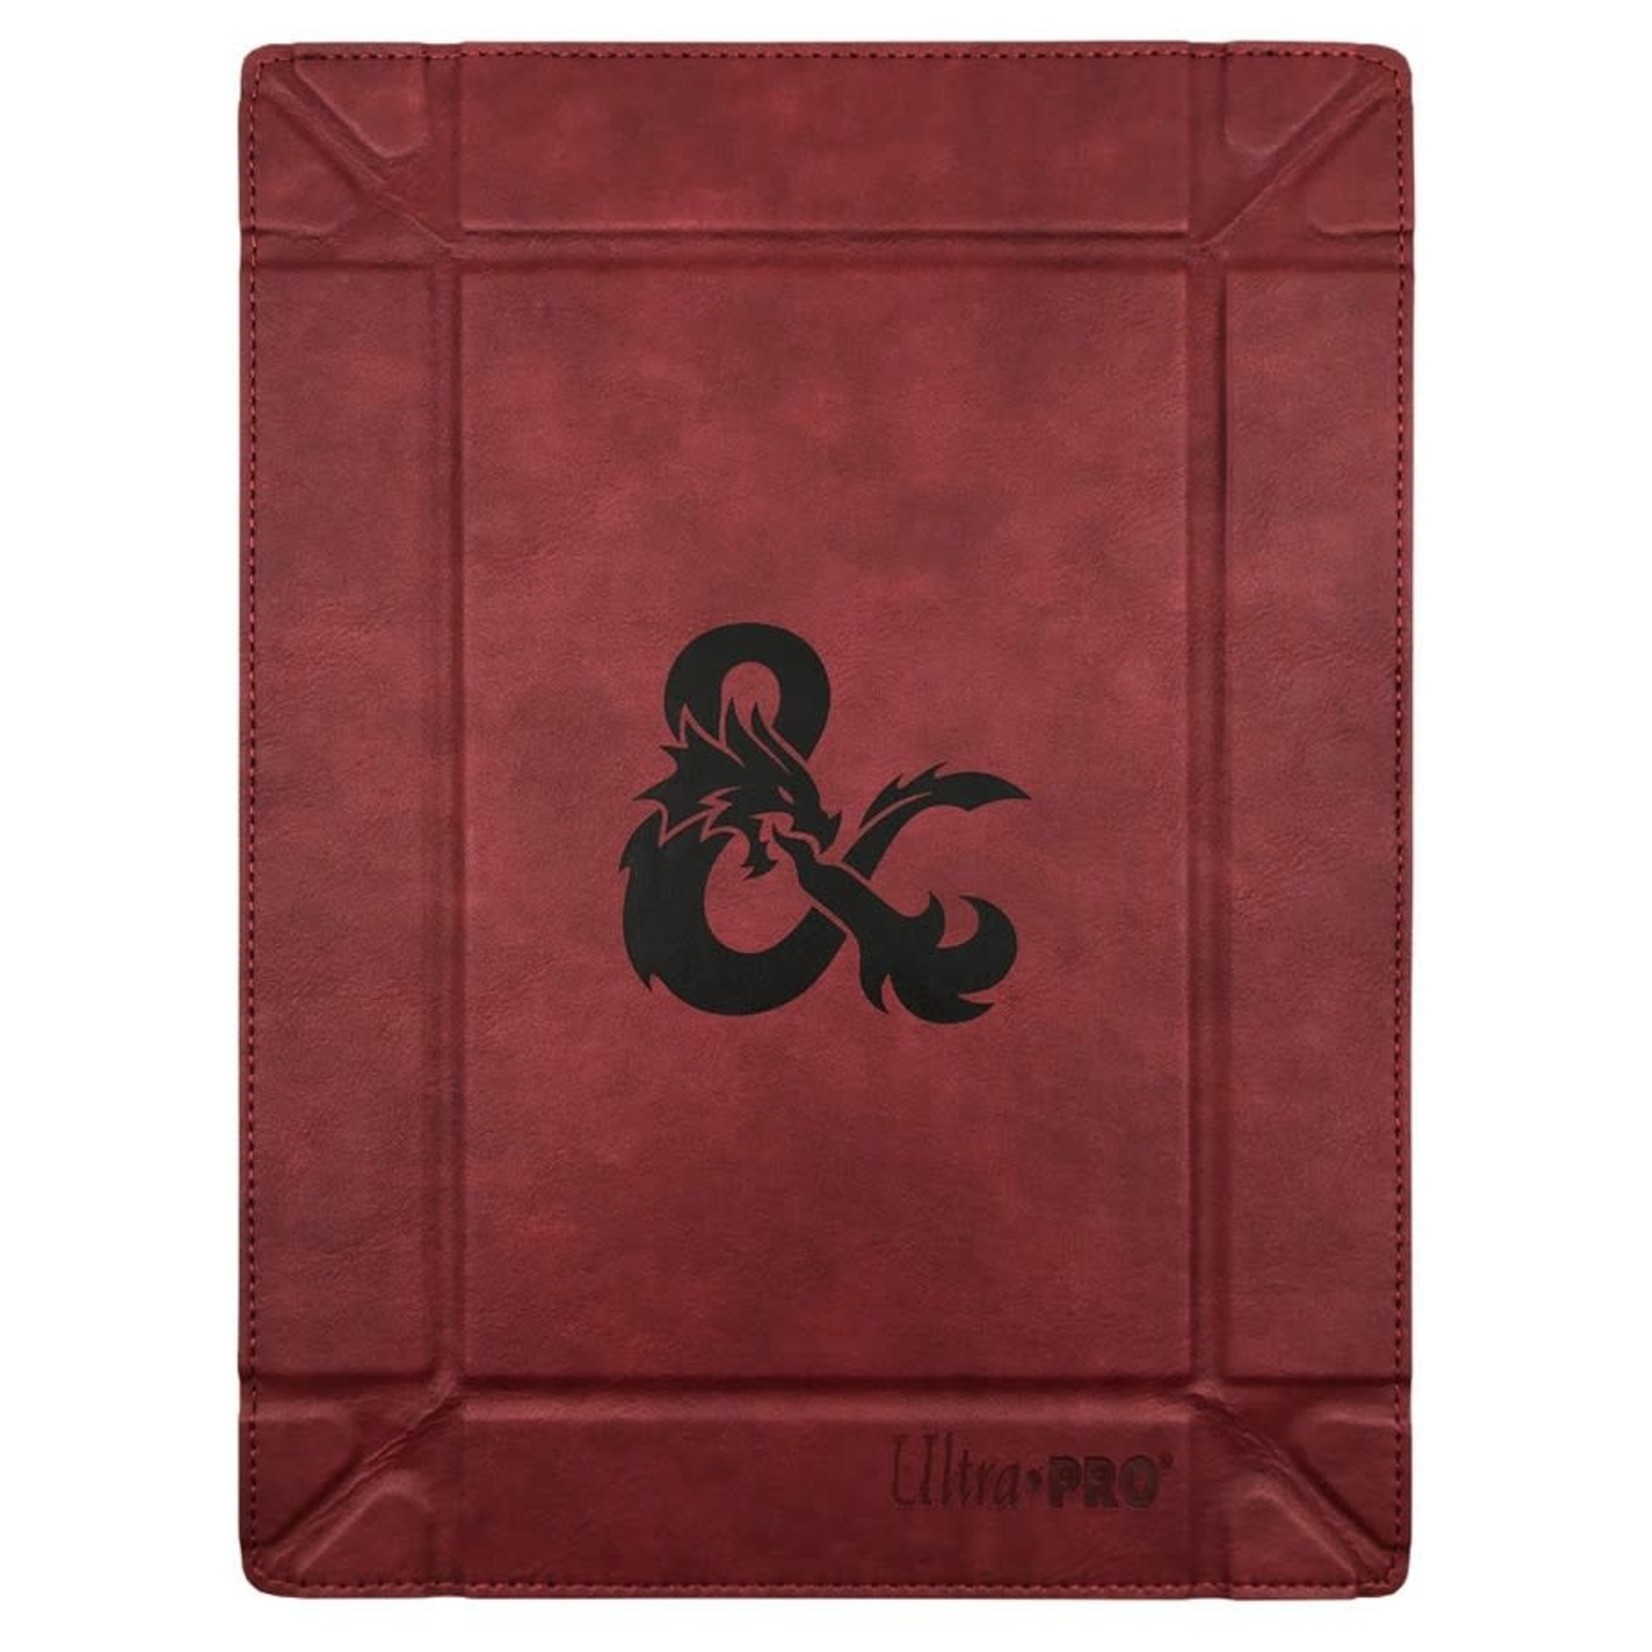 Ultra Pro D&D: Foldable Tray of Rolling: Red with Black